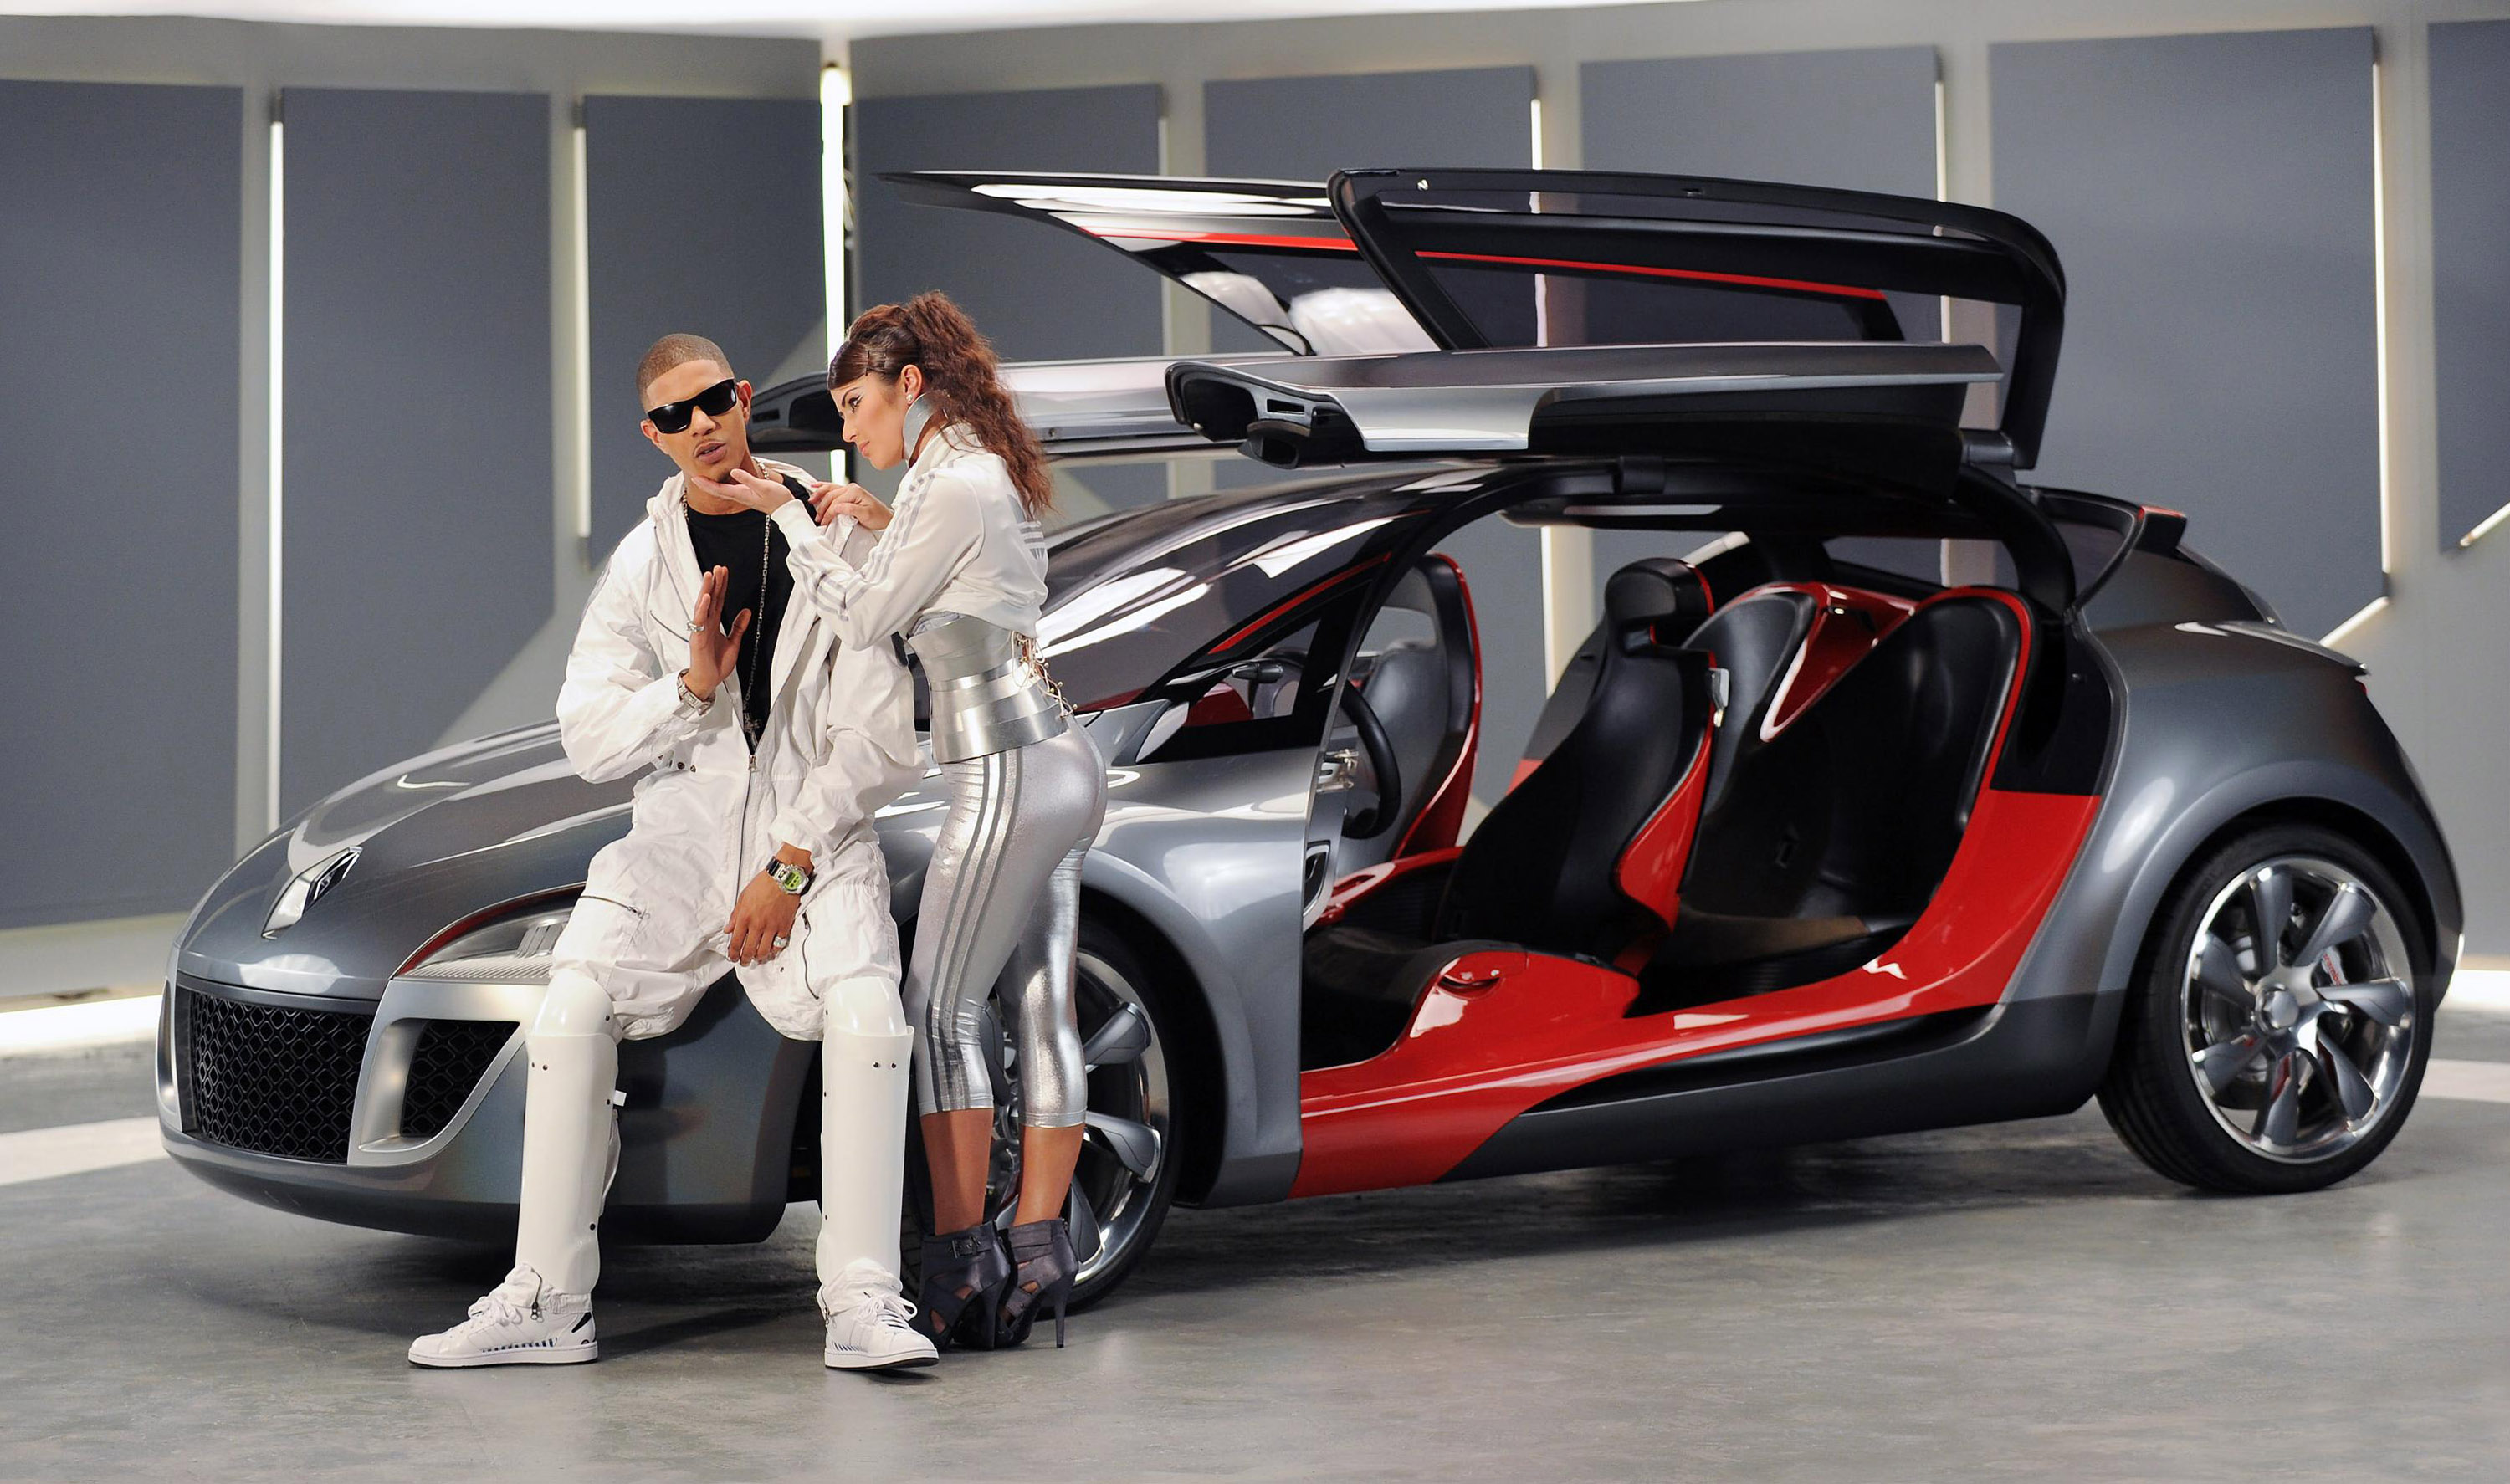 N-Dubz featuring Renault Megane Coupe-Concept